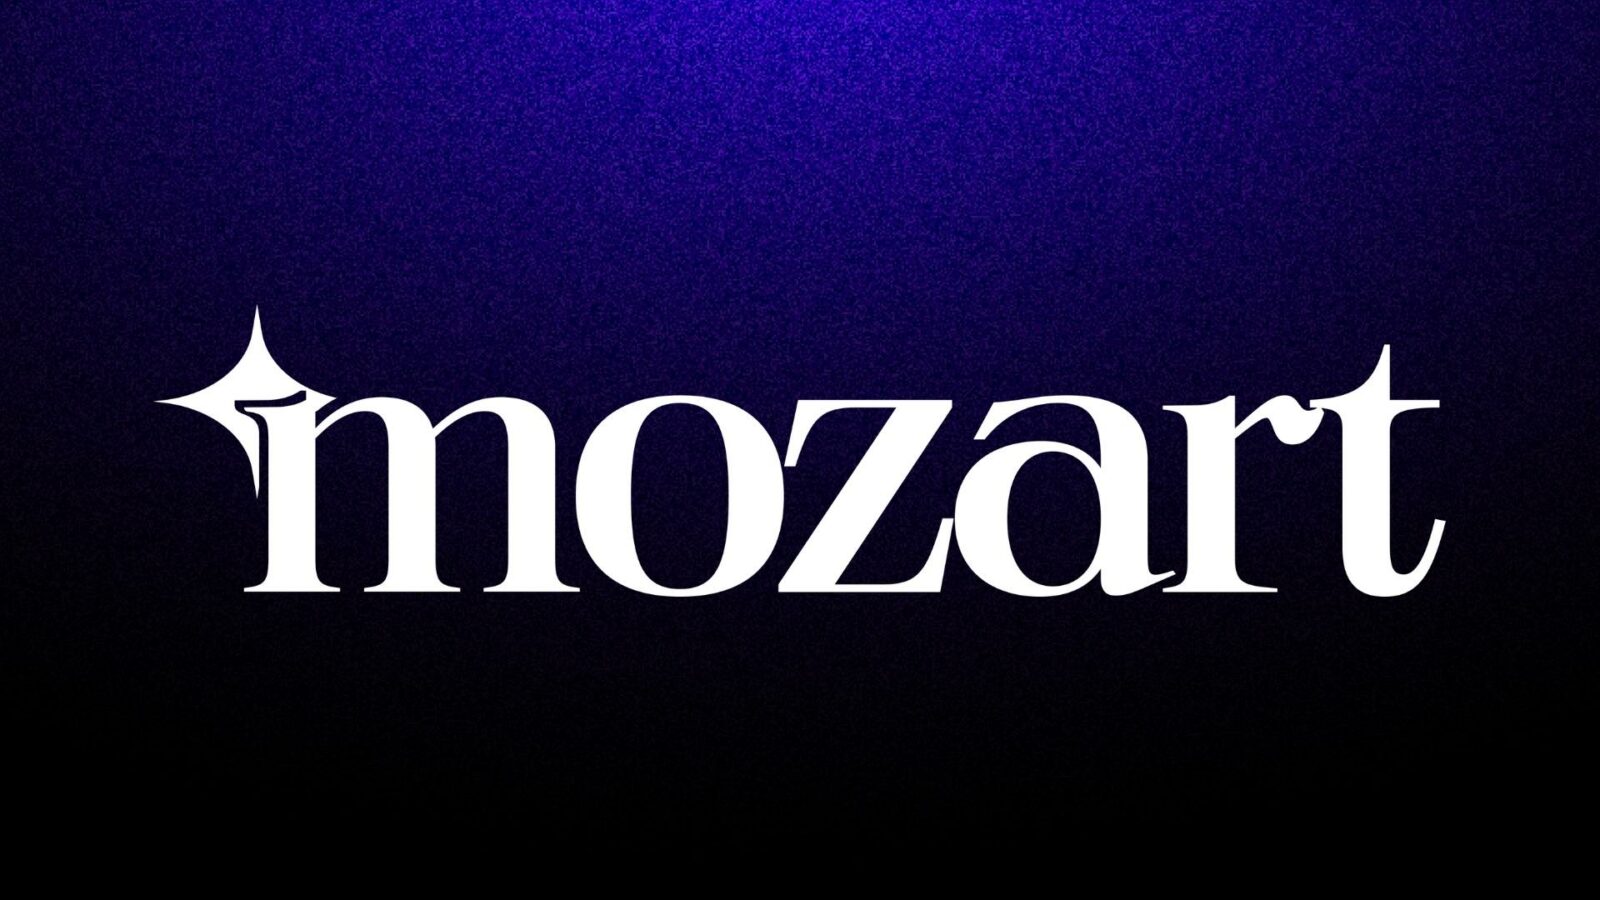 Mozart Raises $3M to Assist Unexperienced Web3 Game Developers 